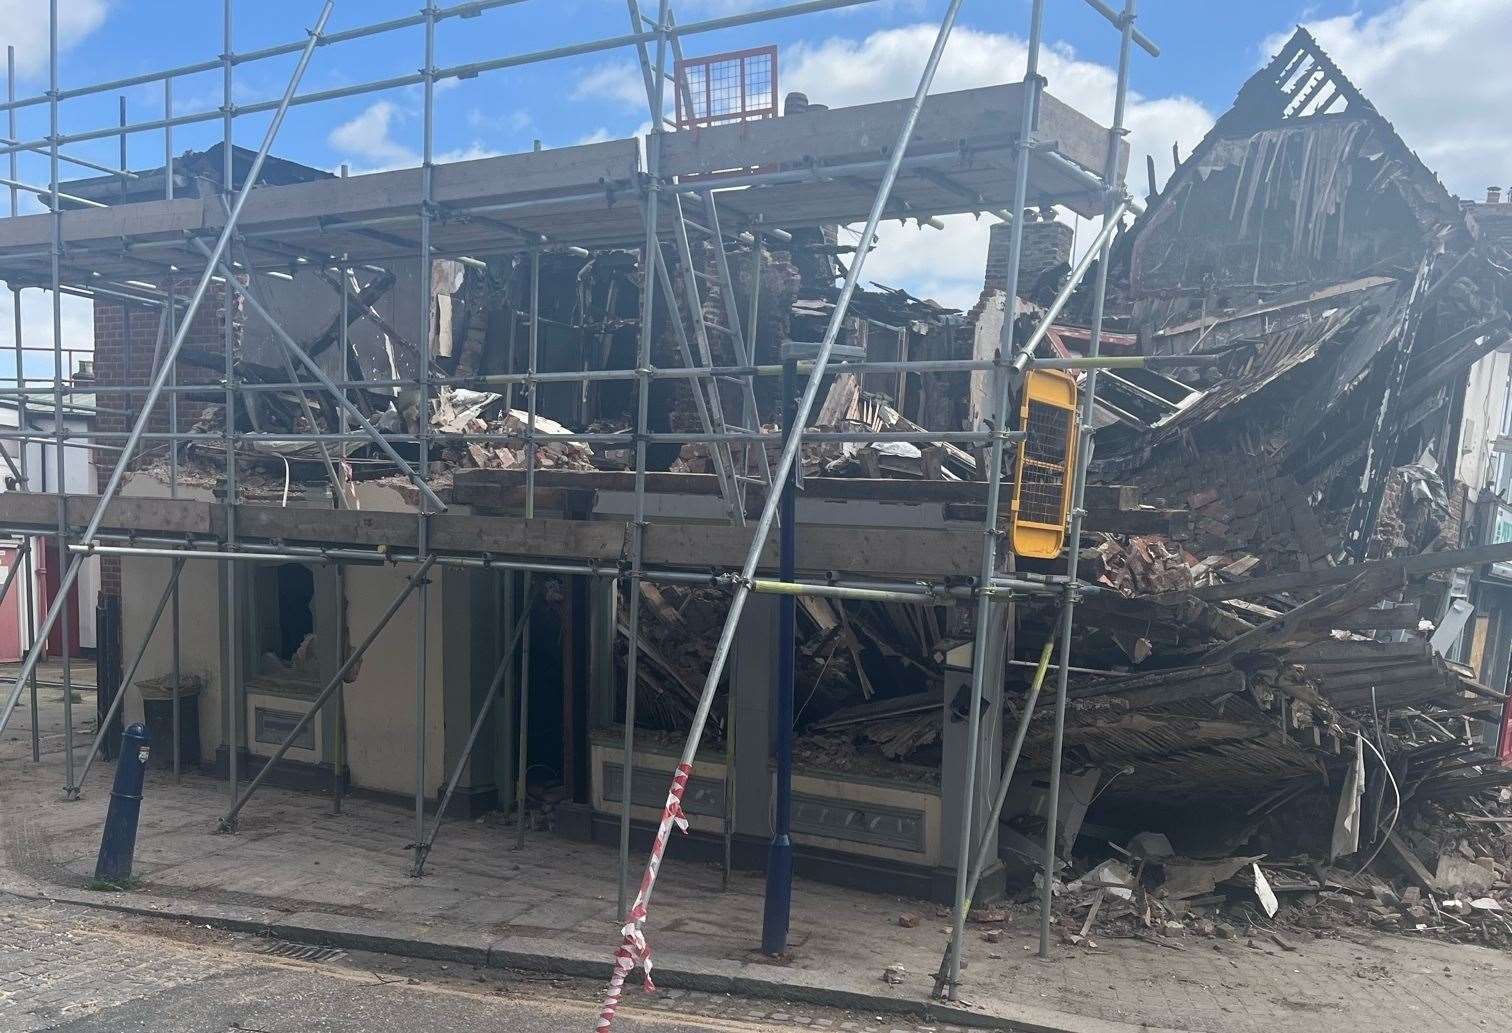 Scaffolding has been put up to prevent further collapse. Picture: Jack Kamenou